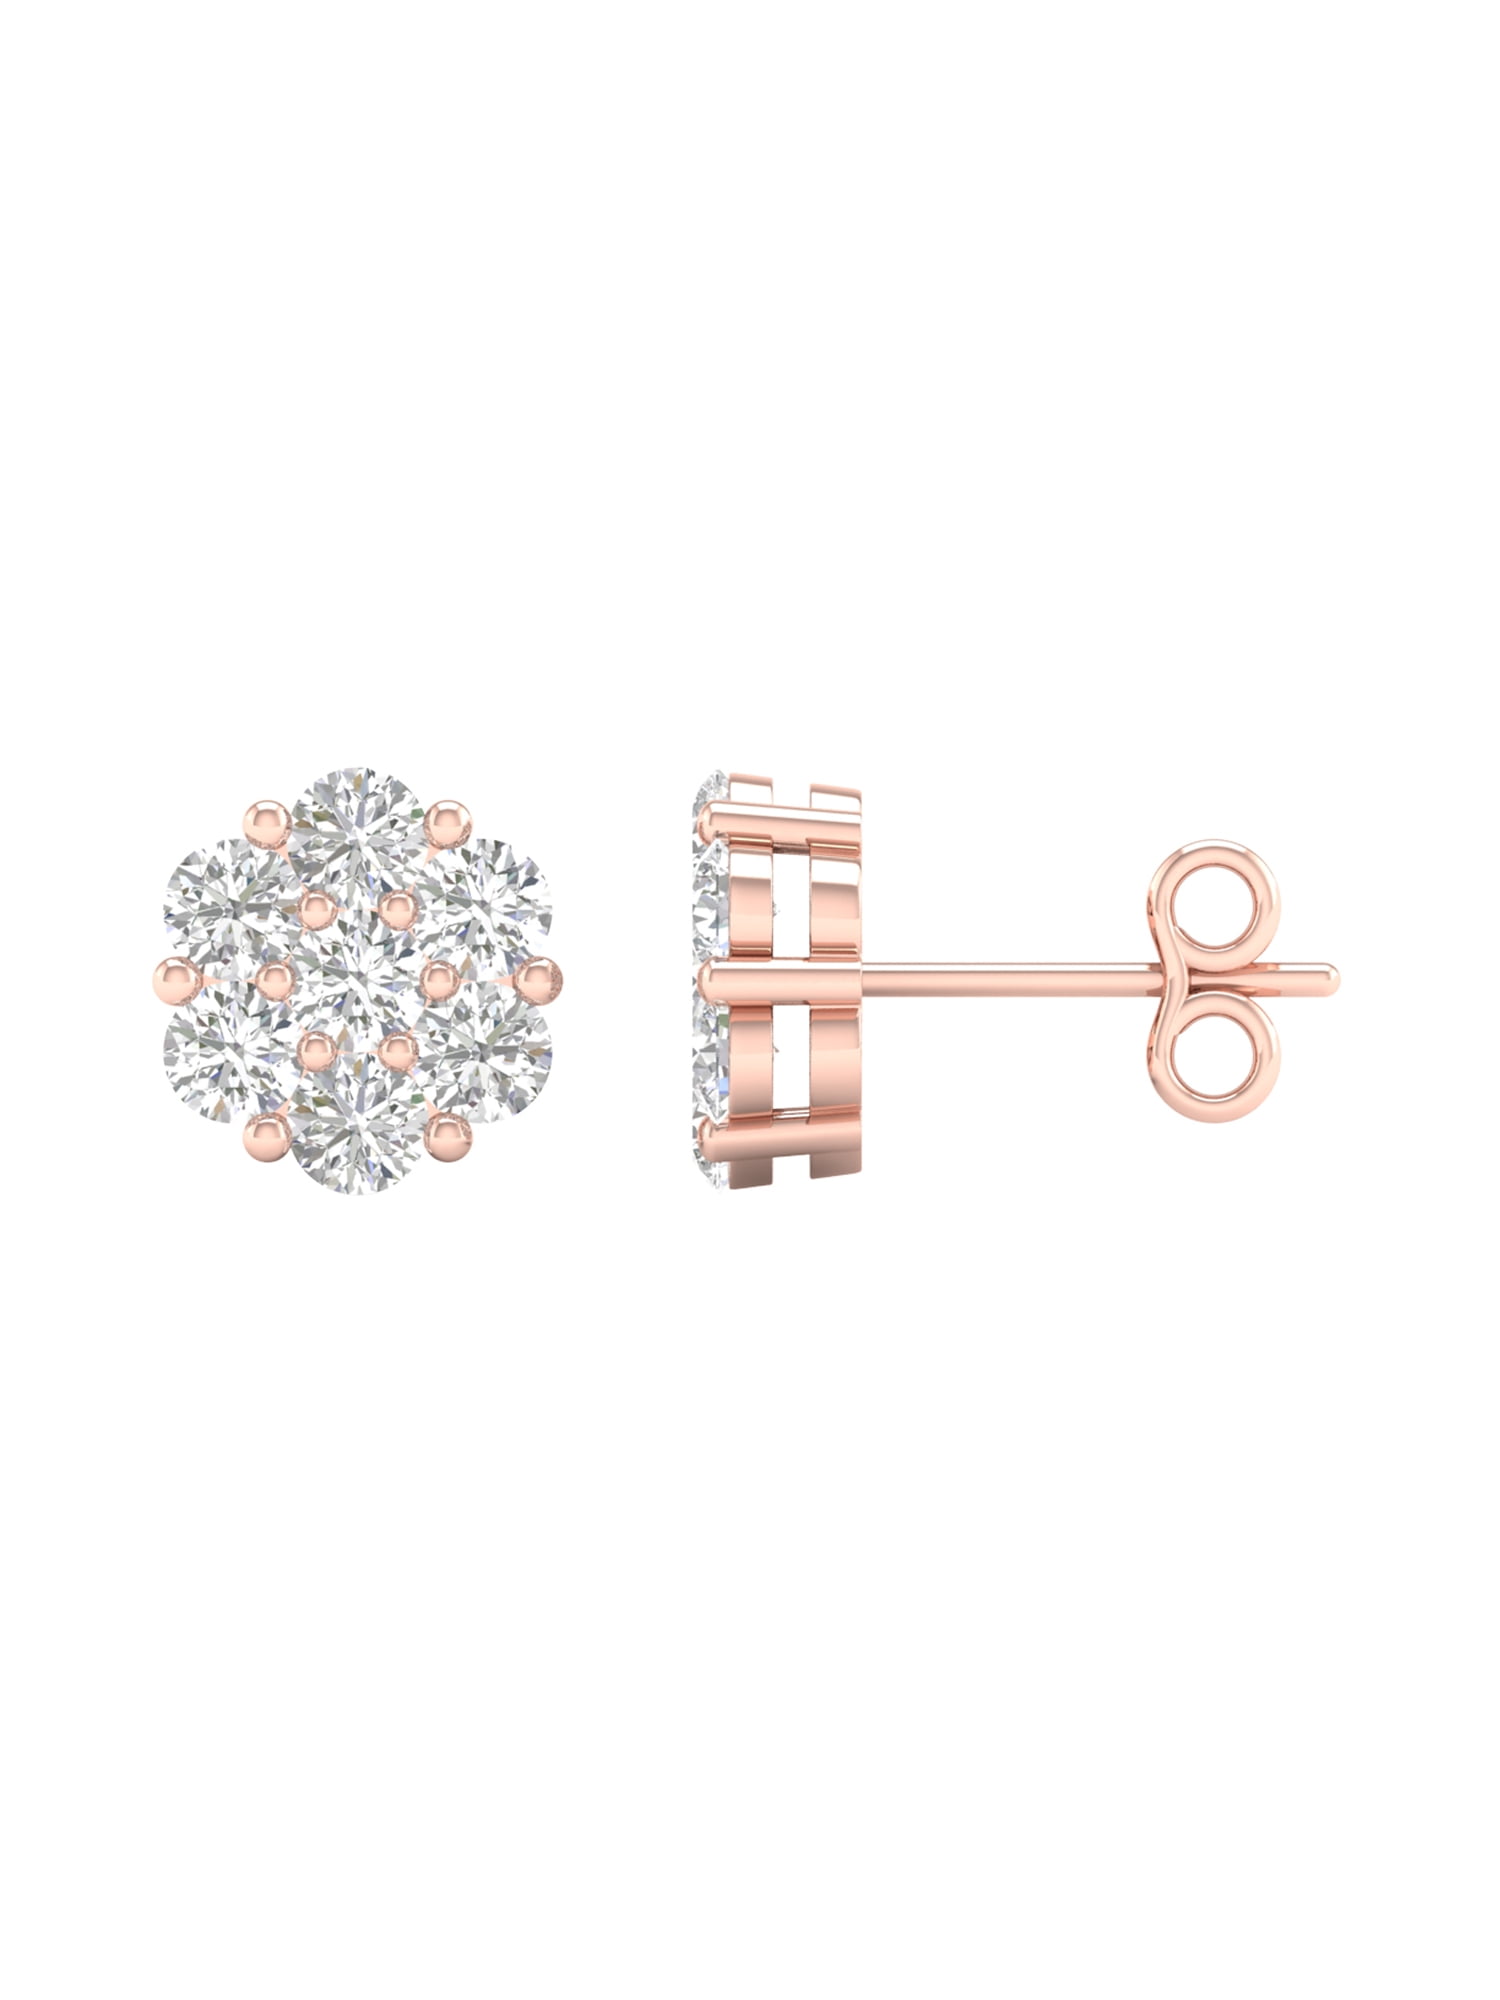 Details about   Natural 0.1ct Round Cut Diamond Ladies Flower Studs Earrings Solid 10K Gold 